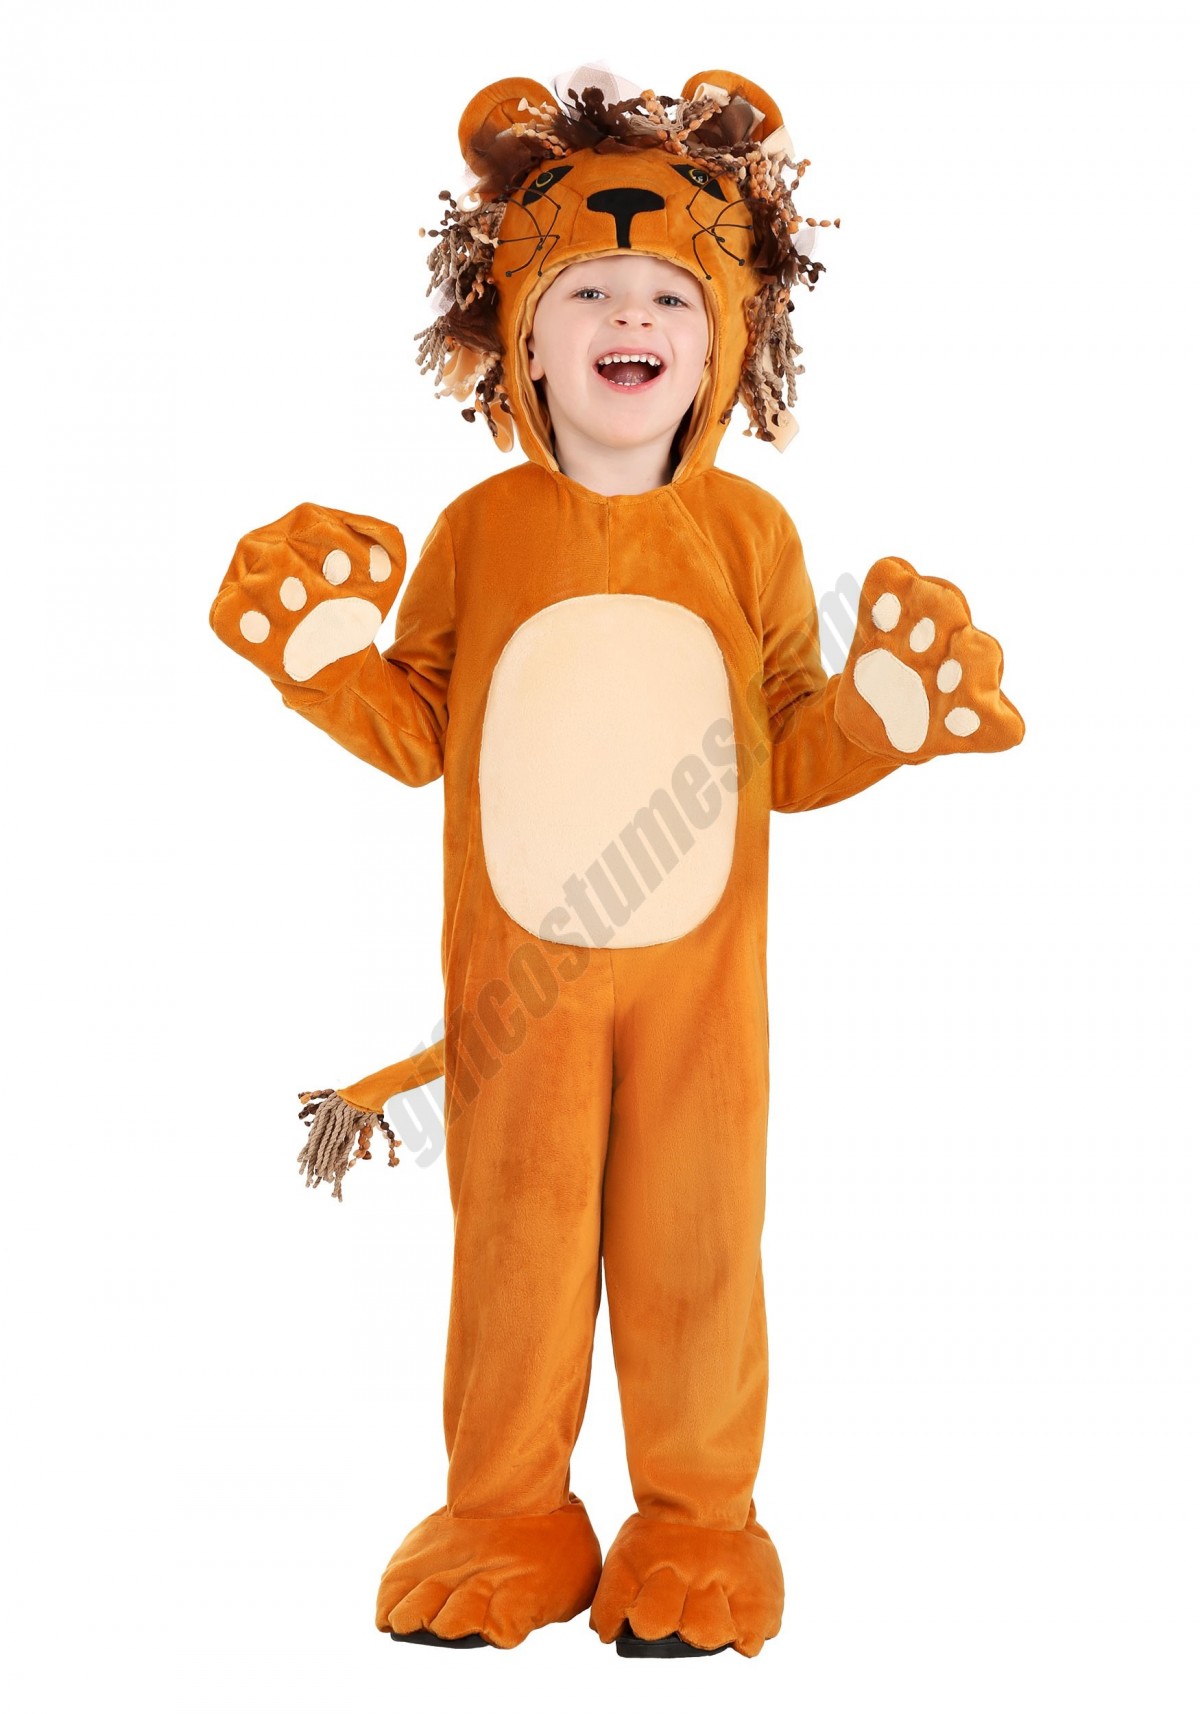 Roaring Lion - Toddler Costume Promotions - -0